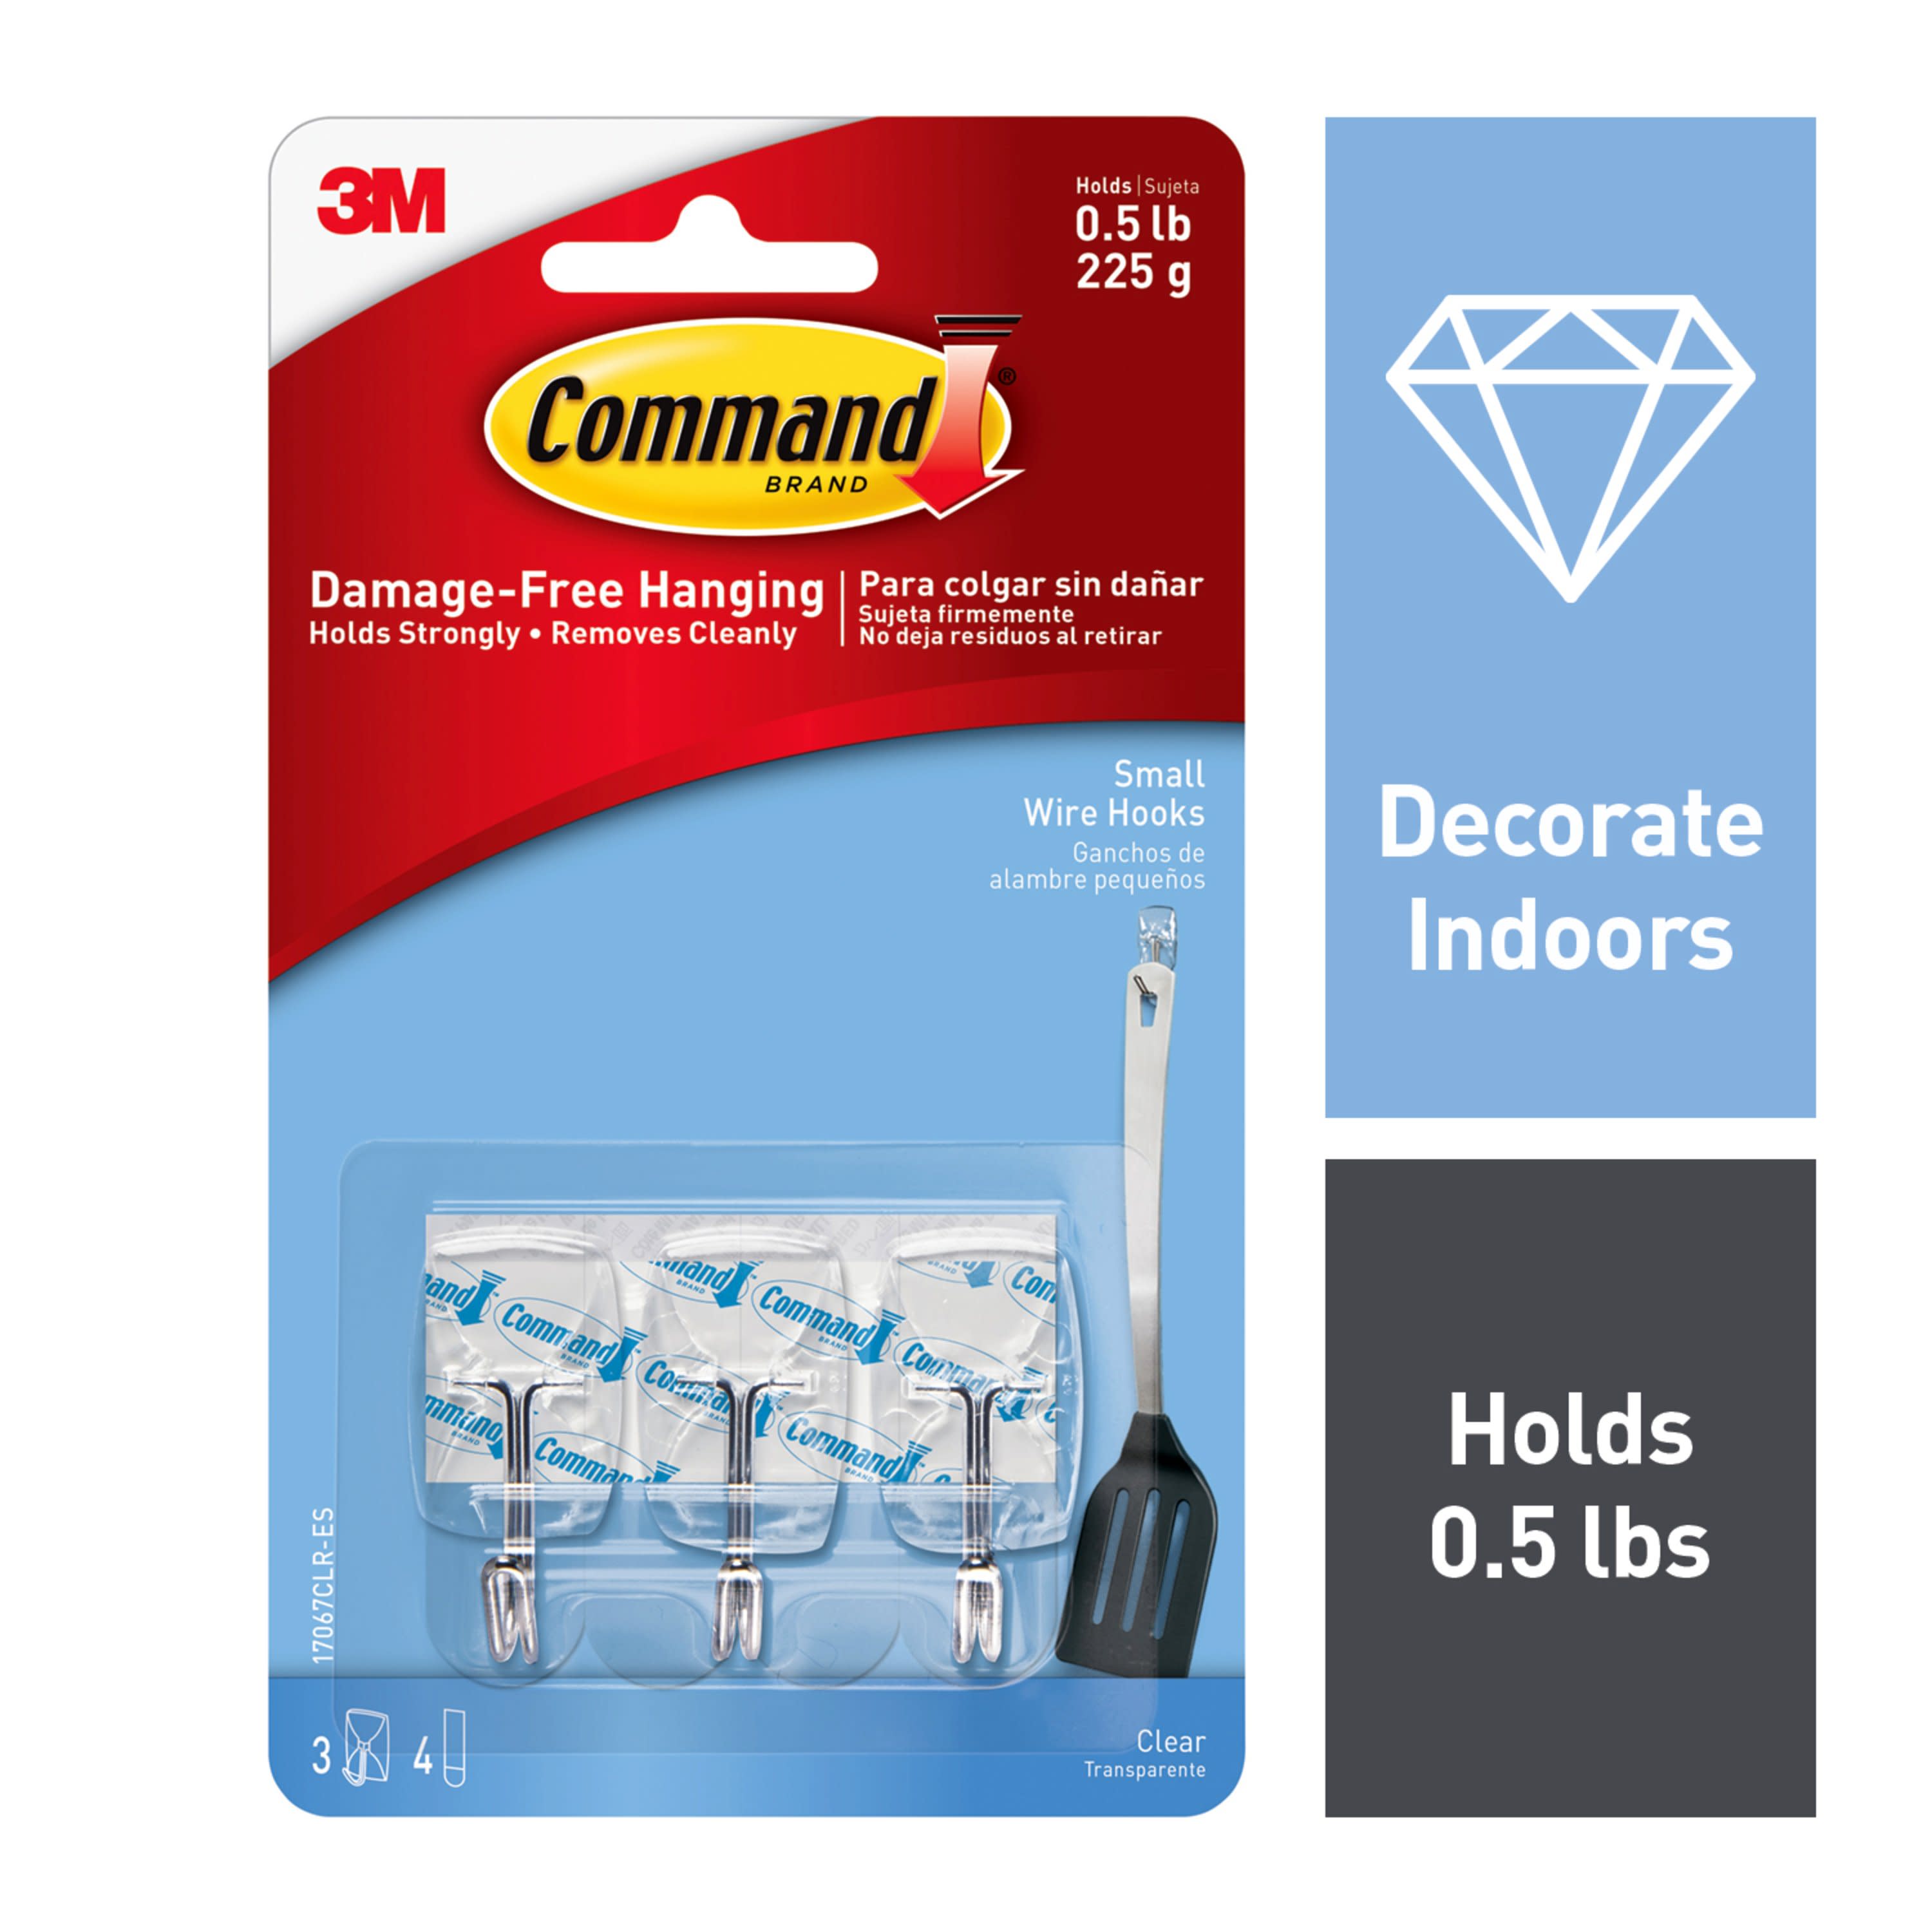 3M Command 9 Small Wire Hooks 12 Adhesive Strips Wall Hanger VALUE PACK  17067